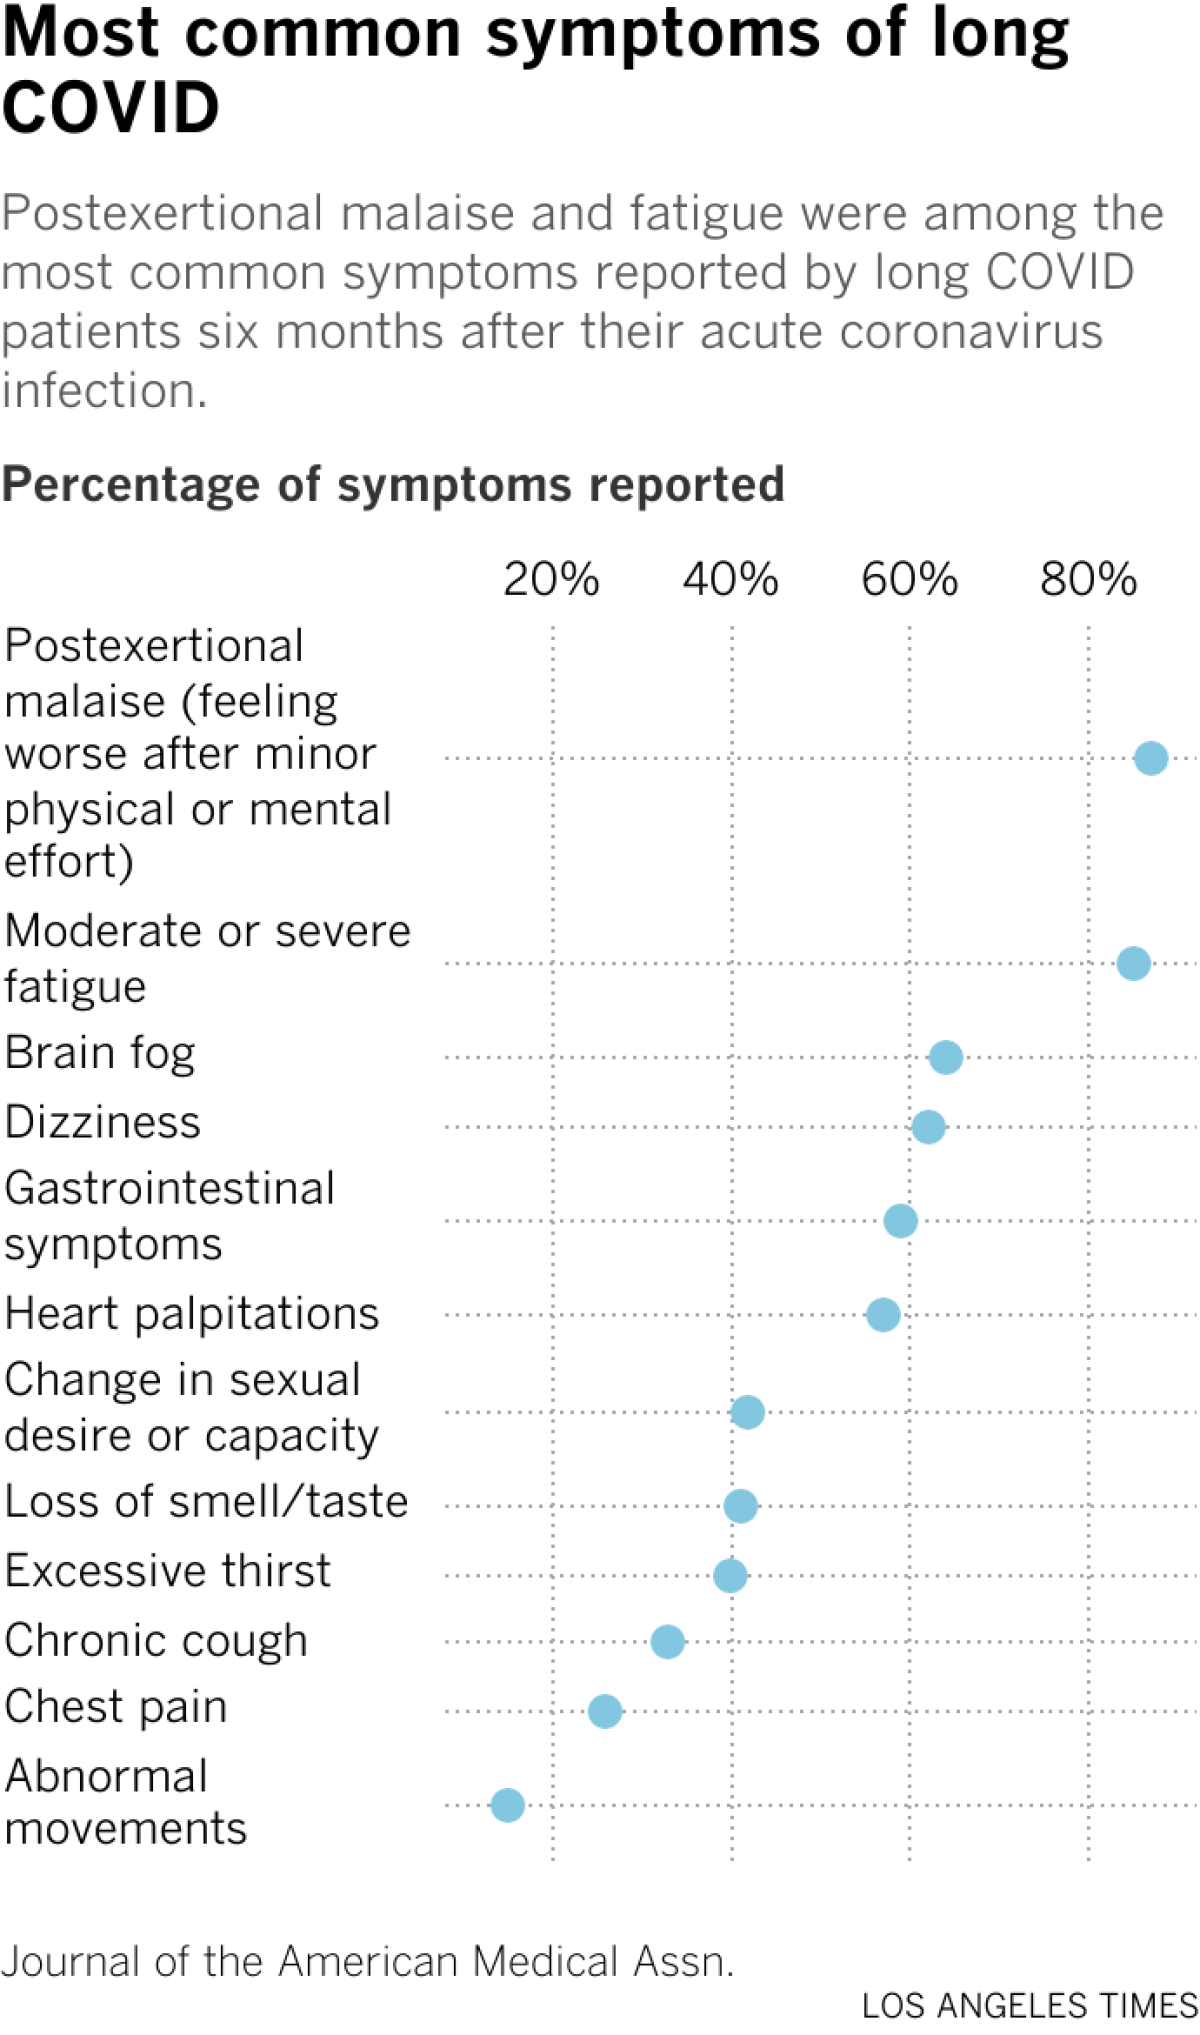 A chart showing the percentages of long COVID patients who reported certain long COVID symptoms. Postexertional malaise was the most frequently-reported symptom at 87% of patients, followed by moderate or severe fatigue at 85%. Chest pain and abnormal movements had the lowest frequencies, at 26% and 15% respectively.